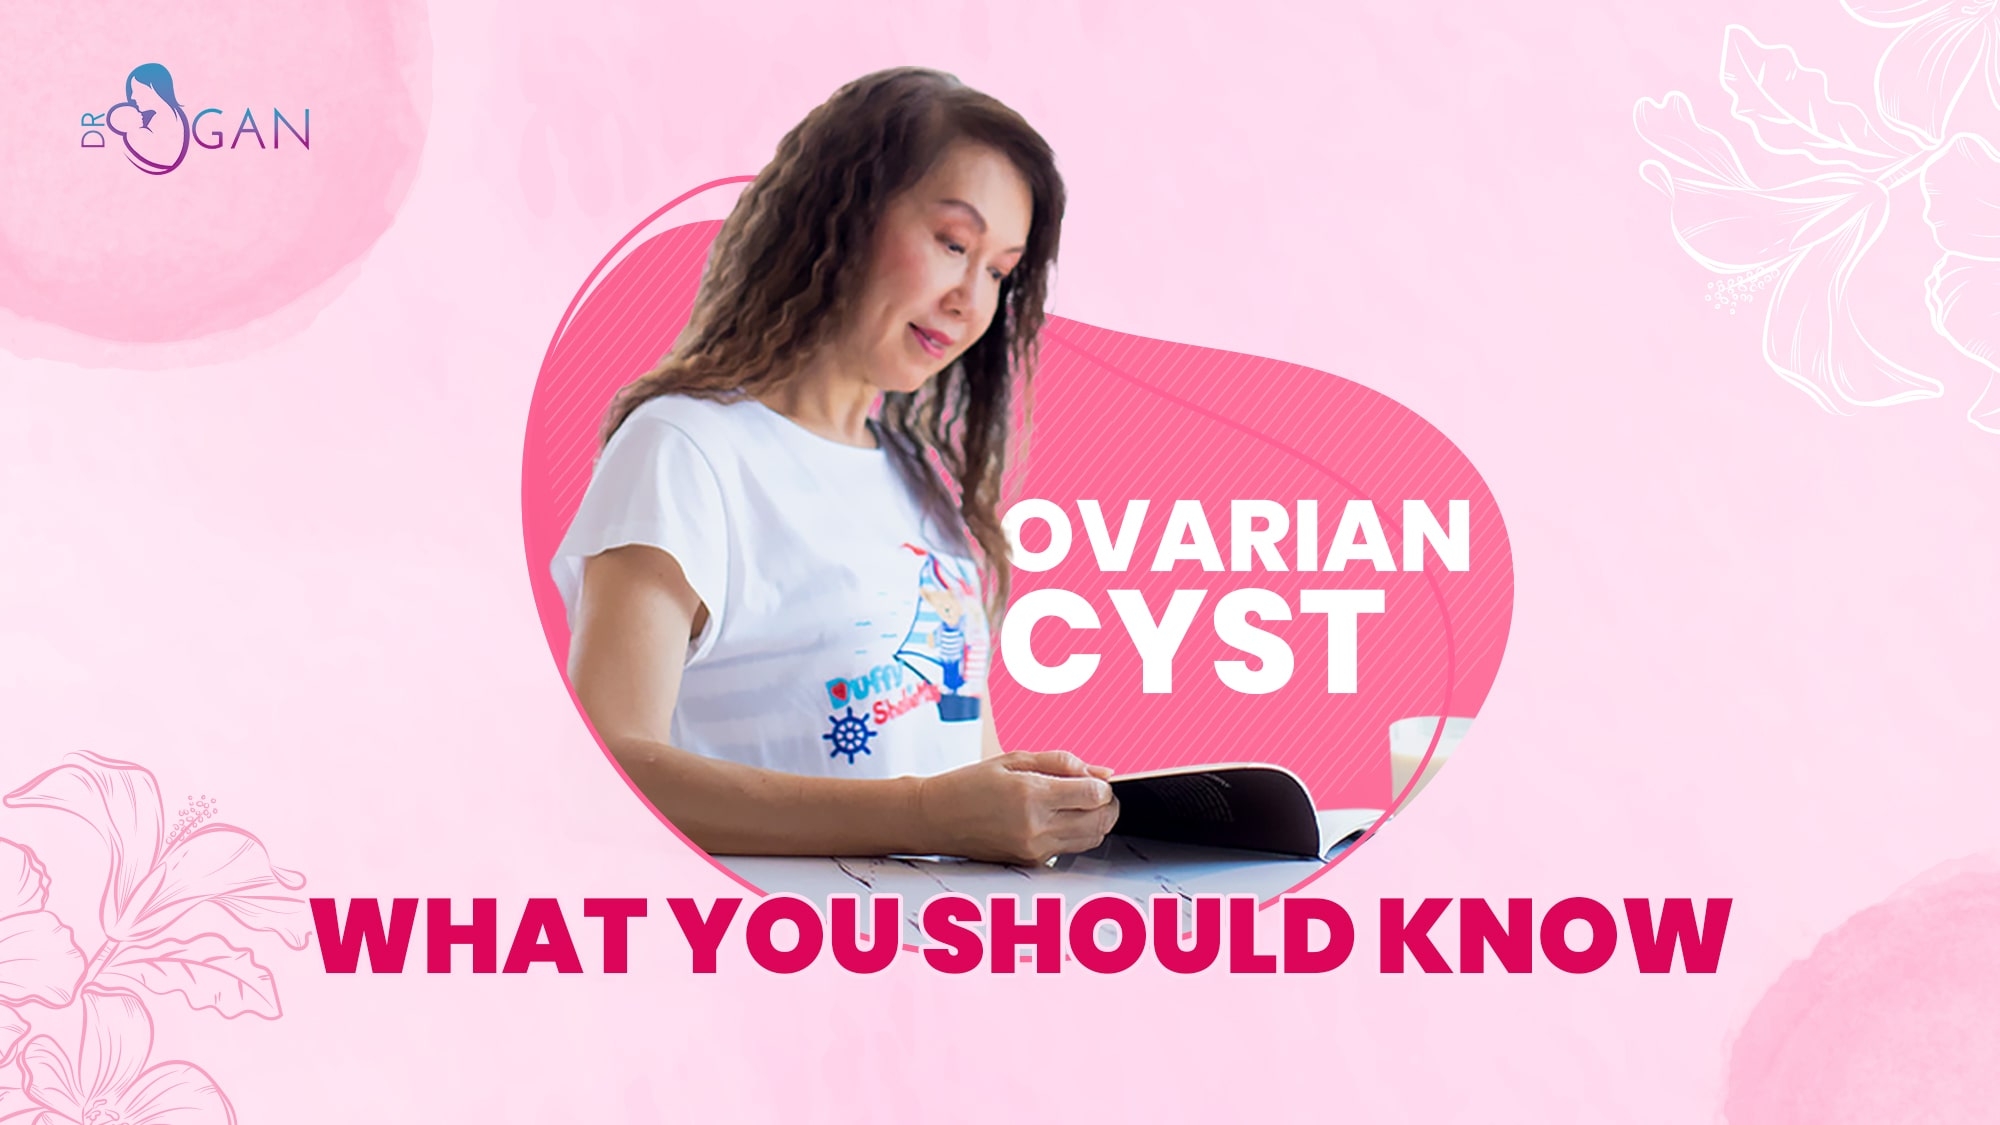 November 11 Article Ovarian Cyst What You Should Know Resize Final-min